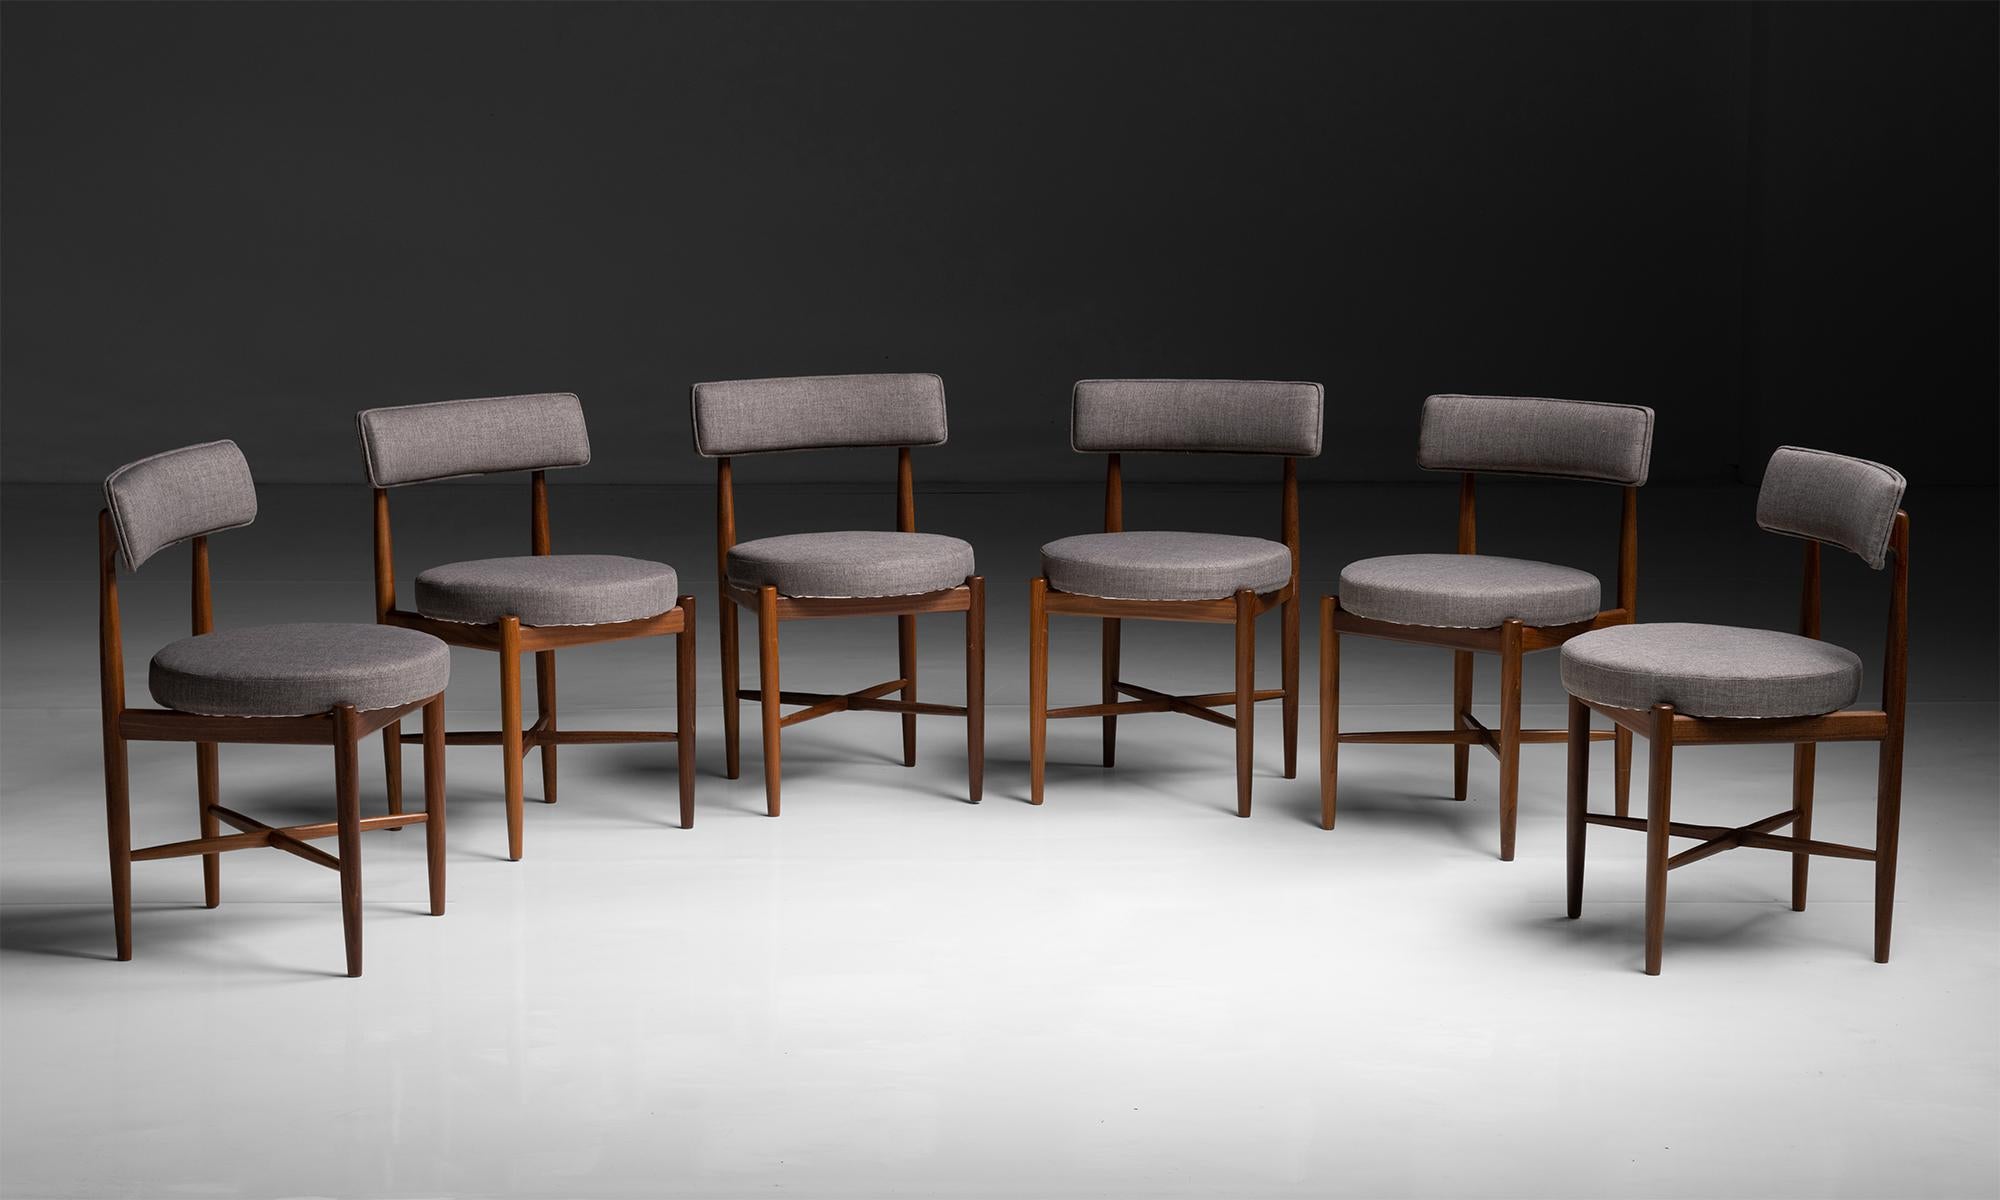 Set of (6) Dining Chairs by Victor Wilkins

England circa 1960

“G-Plan” Dining Chairs with teak frame and original upholstery.

Measures 19.75”w x 19.5”d x 30.25”h x 18.75”seat.